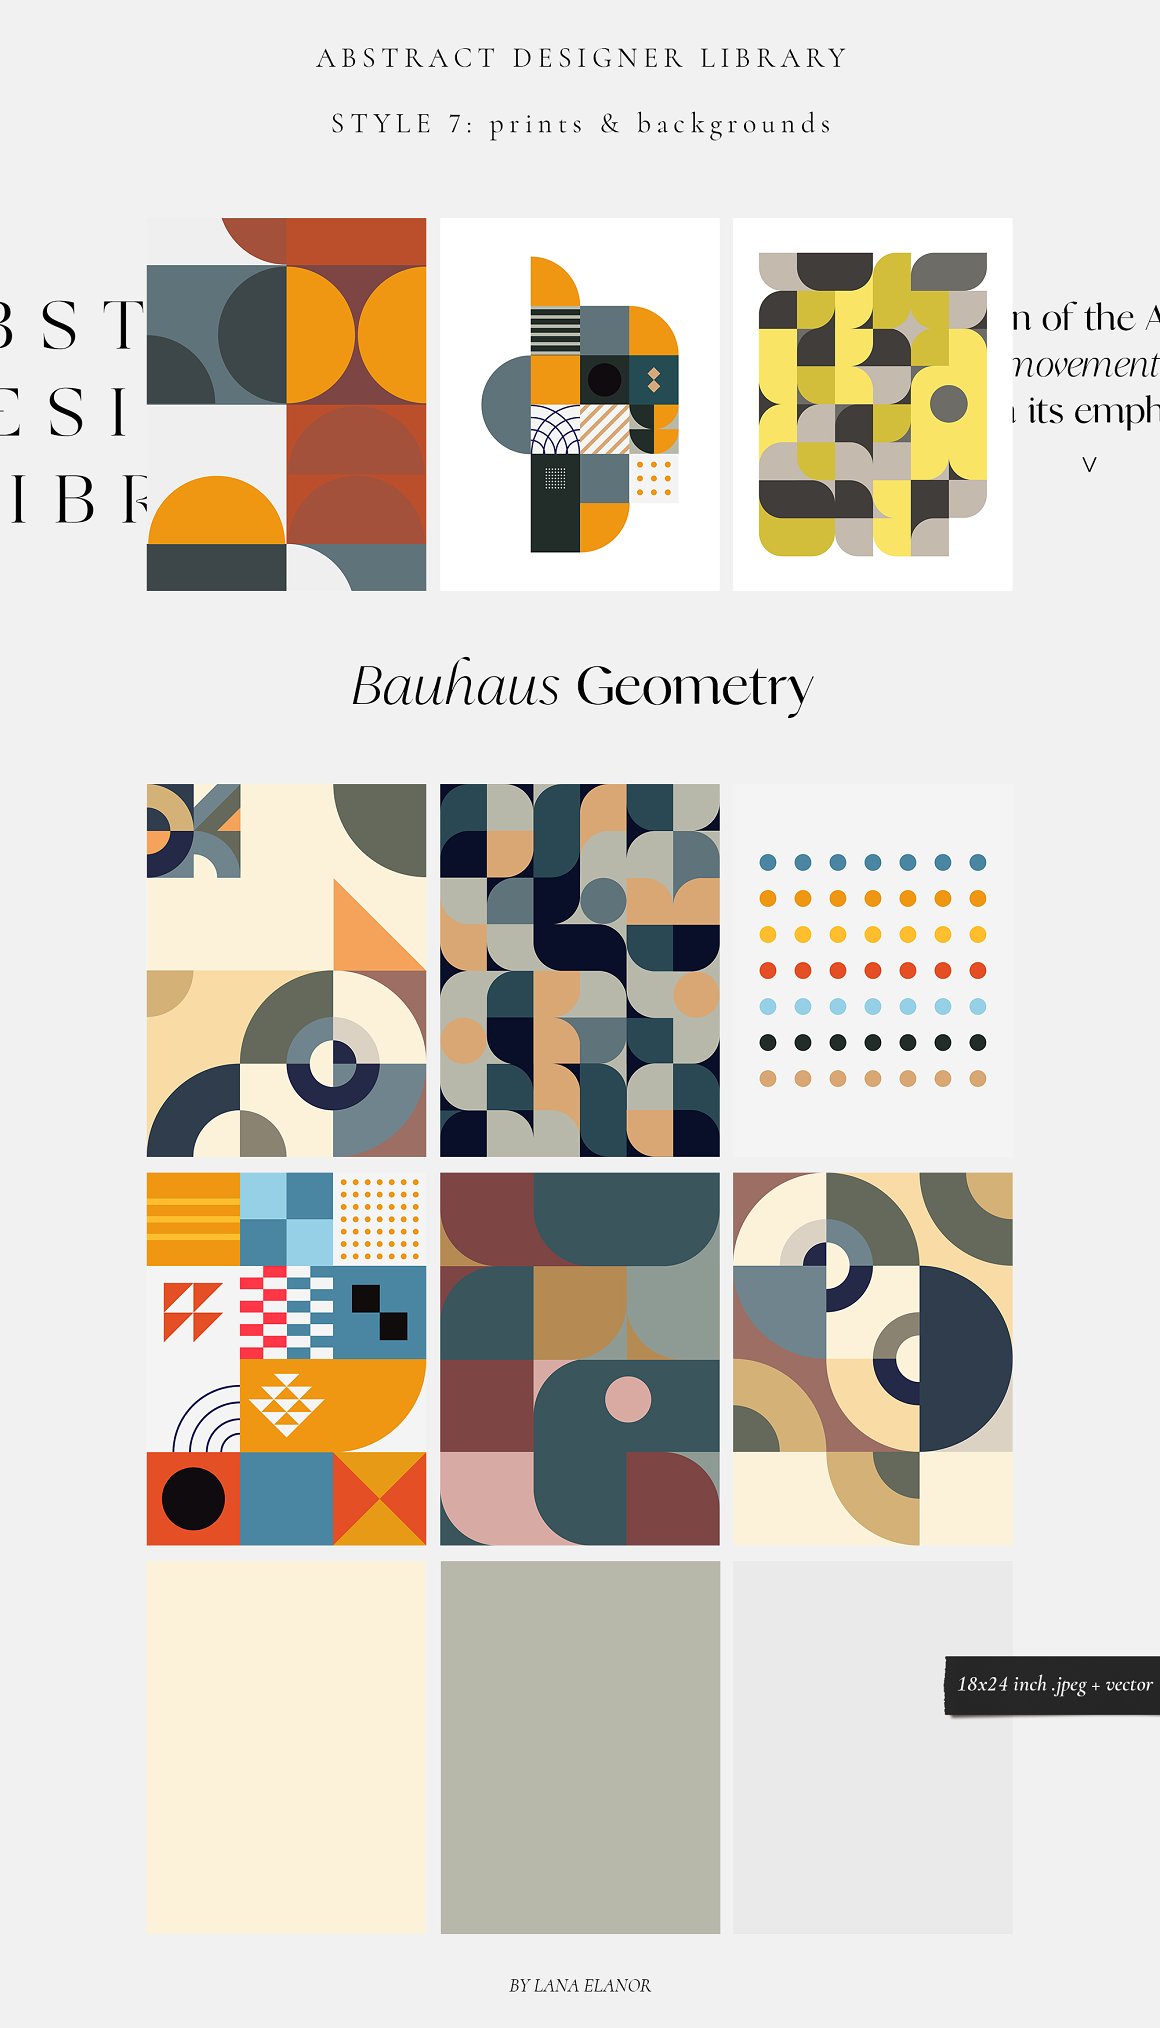 Bauhaus geometry library on a gray background.